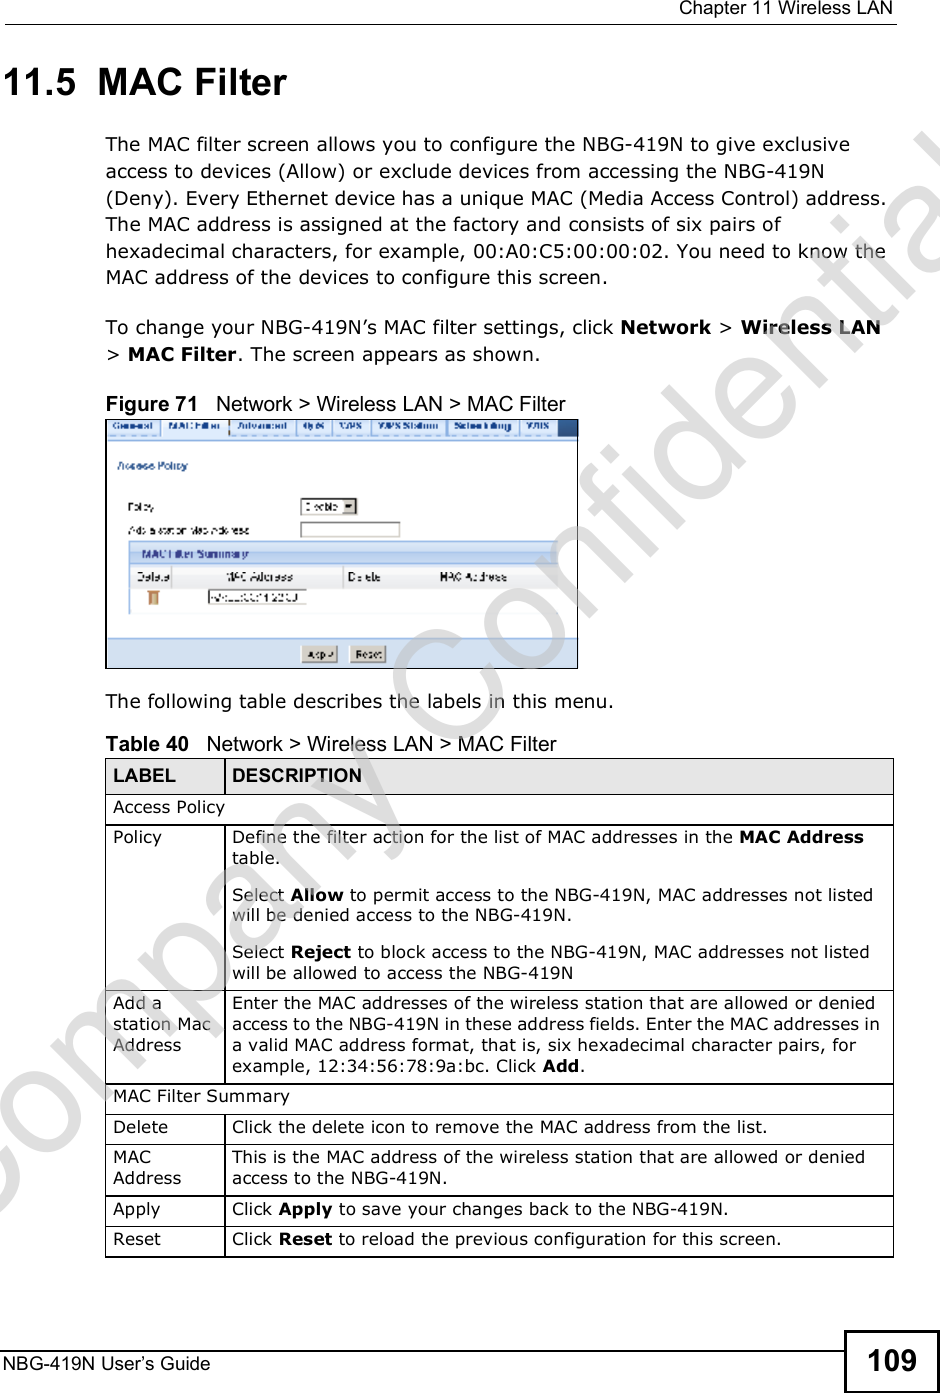  Chapter 11Wireless LANNBG-419N User s Guide 10911.5  MAC FilterThe MAC filter screen allows you to configure the NBG-419N to give exclusive access to devices (Allow) or exclude devices from accessing the NBG-419N (Deny). Every Ethernet device has a unique MAC (Media Access Control) address. The MAC address is assigned at the factory and consists of six pairs of hexadecimal characters, for example, 00:A0:C5:00:00:02. You need to know the MAC address of the devices to configure this screen.To change your NBG-419N!s MAC filter settings, click Network &gt; Wireless LAN &gt; MAC Filter. The screen appears as shown.Figure 71   Network &gt; Wireless LAN &gt; MAC FilterThe following table describes the labels in this menu.Table 40   Network &gt; Wireless LAN &gt; MAC FilterLABEL DESCRIPTIONAccess PolicyPolicy  Define the filter action for the list of MAC addresses in the MAC Address table. Select Allow to permit access to the NBG-419N, MAC addresses not listed will be denied access to the NBG-419N. Select Reject to block access to the NBG-419N, MAC addresses not listed will be allowed to access the NBG-419N Add a station Mac AddressEnter the MAC addresses of the wireless station that are allowed or denied access to the NBG-419N in these address fields. Enter the MAC addresses in a valid MAC address format, that is, six hexadecimal character pairs, for example, 12:34:56:78:9a:bc. Click Add.MAC Filter SummaryDelete Click the delete icon to remove the MAC address from the list.MAC AddressThis is the MAC address of the wireless station that are allowed or denied access to the NBG-419N.Apply Click Apply to save your changes back to the NBG-419N.Reset Click Reset to reload the previous configuration for this screen.Company Confidential